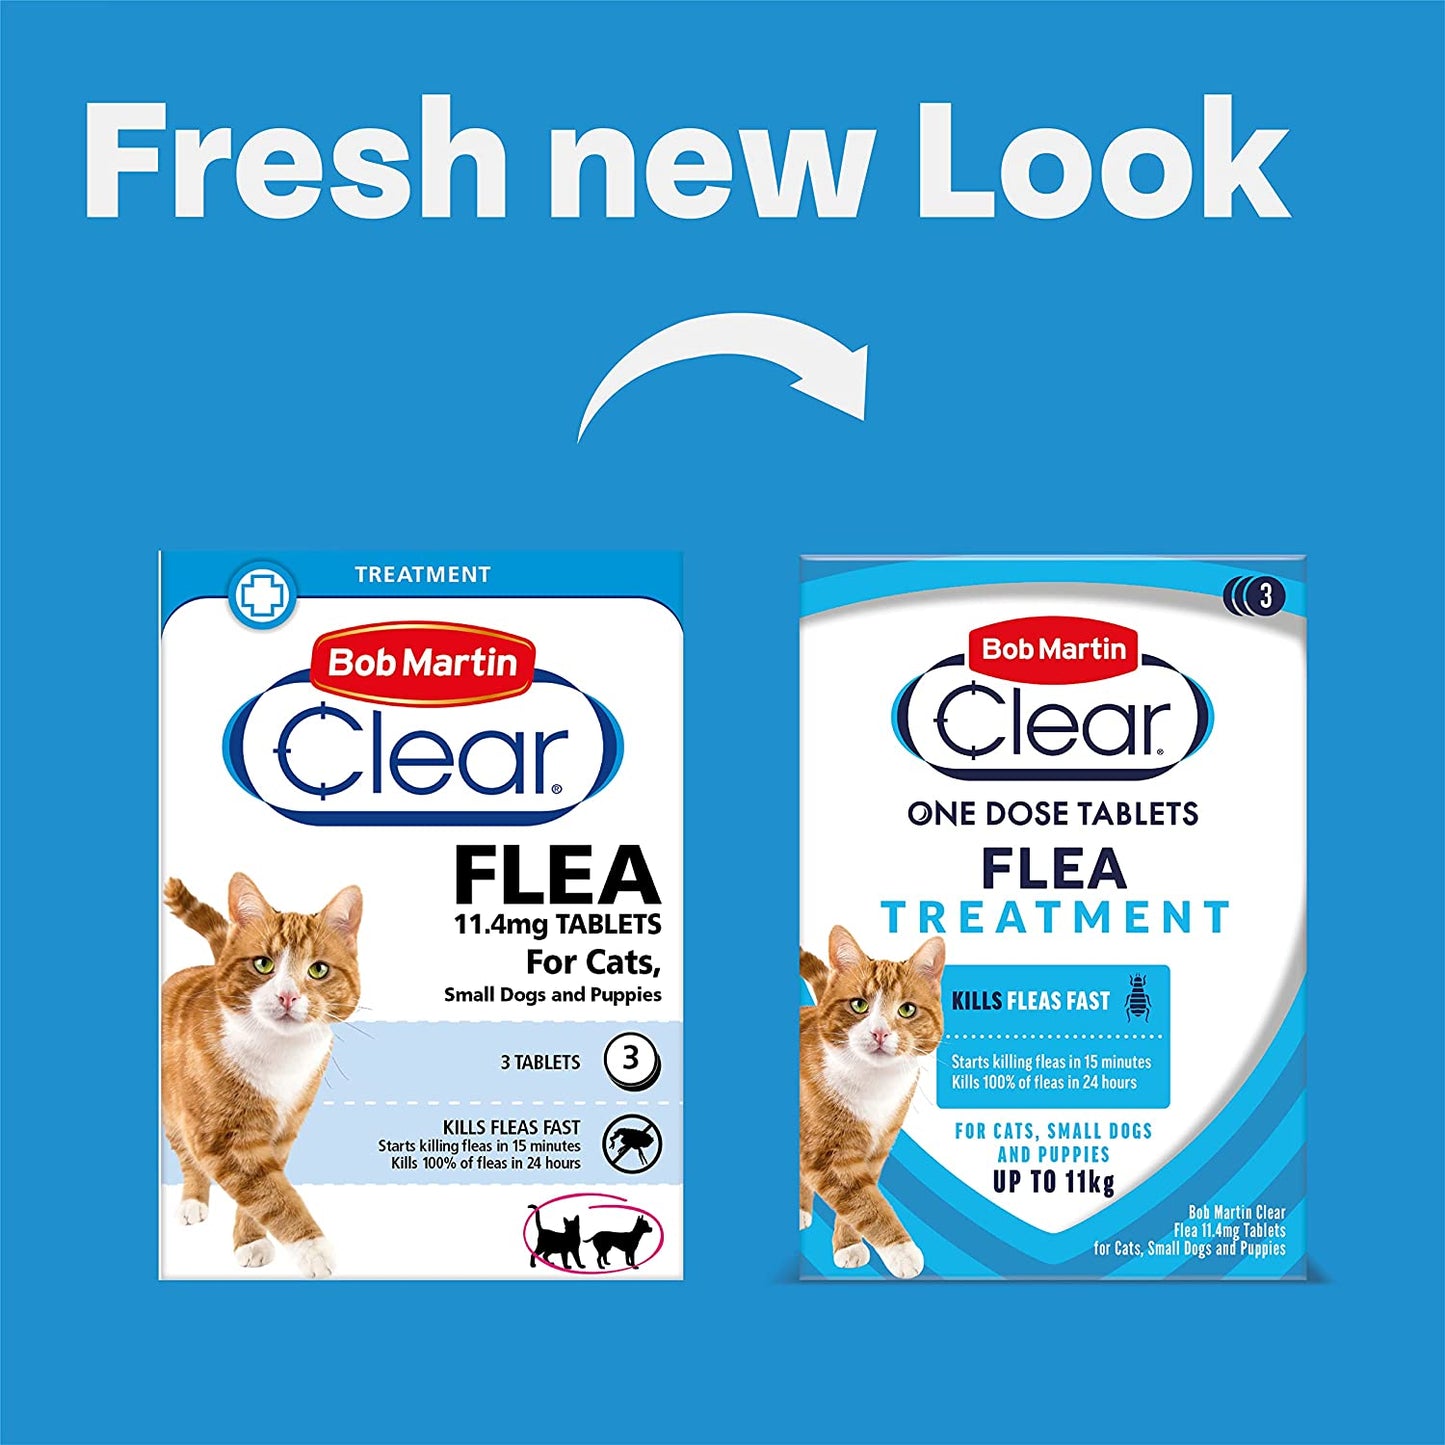 Clear | Cat Flea Tablets, Also Suitable for Small Dogs and Puppies (1-11 Kg) | Effective Treatment, Kills 100% of Fleas within 24 Hours (3 Tablets)